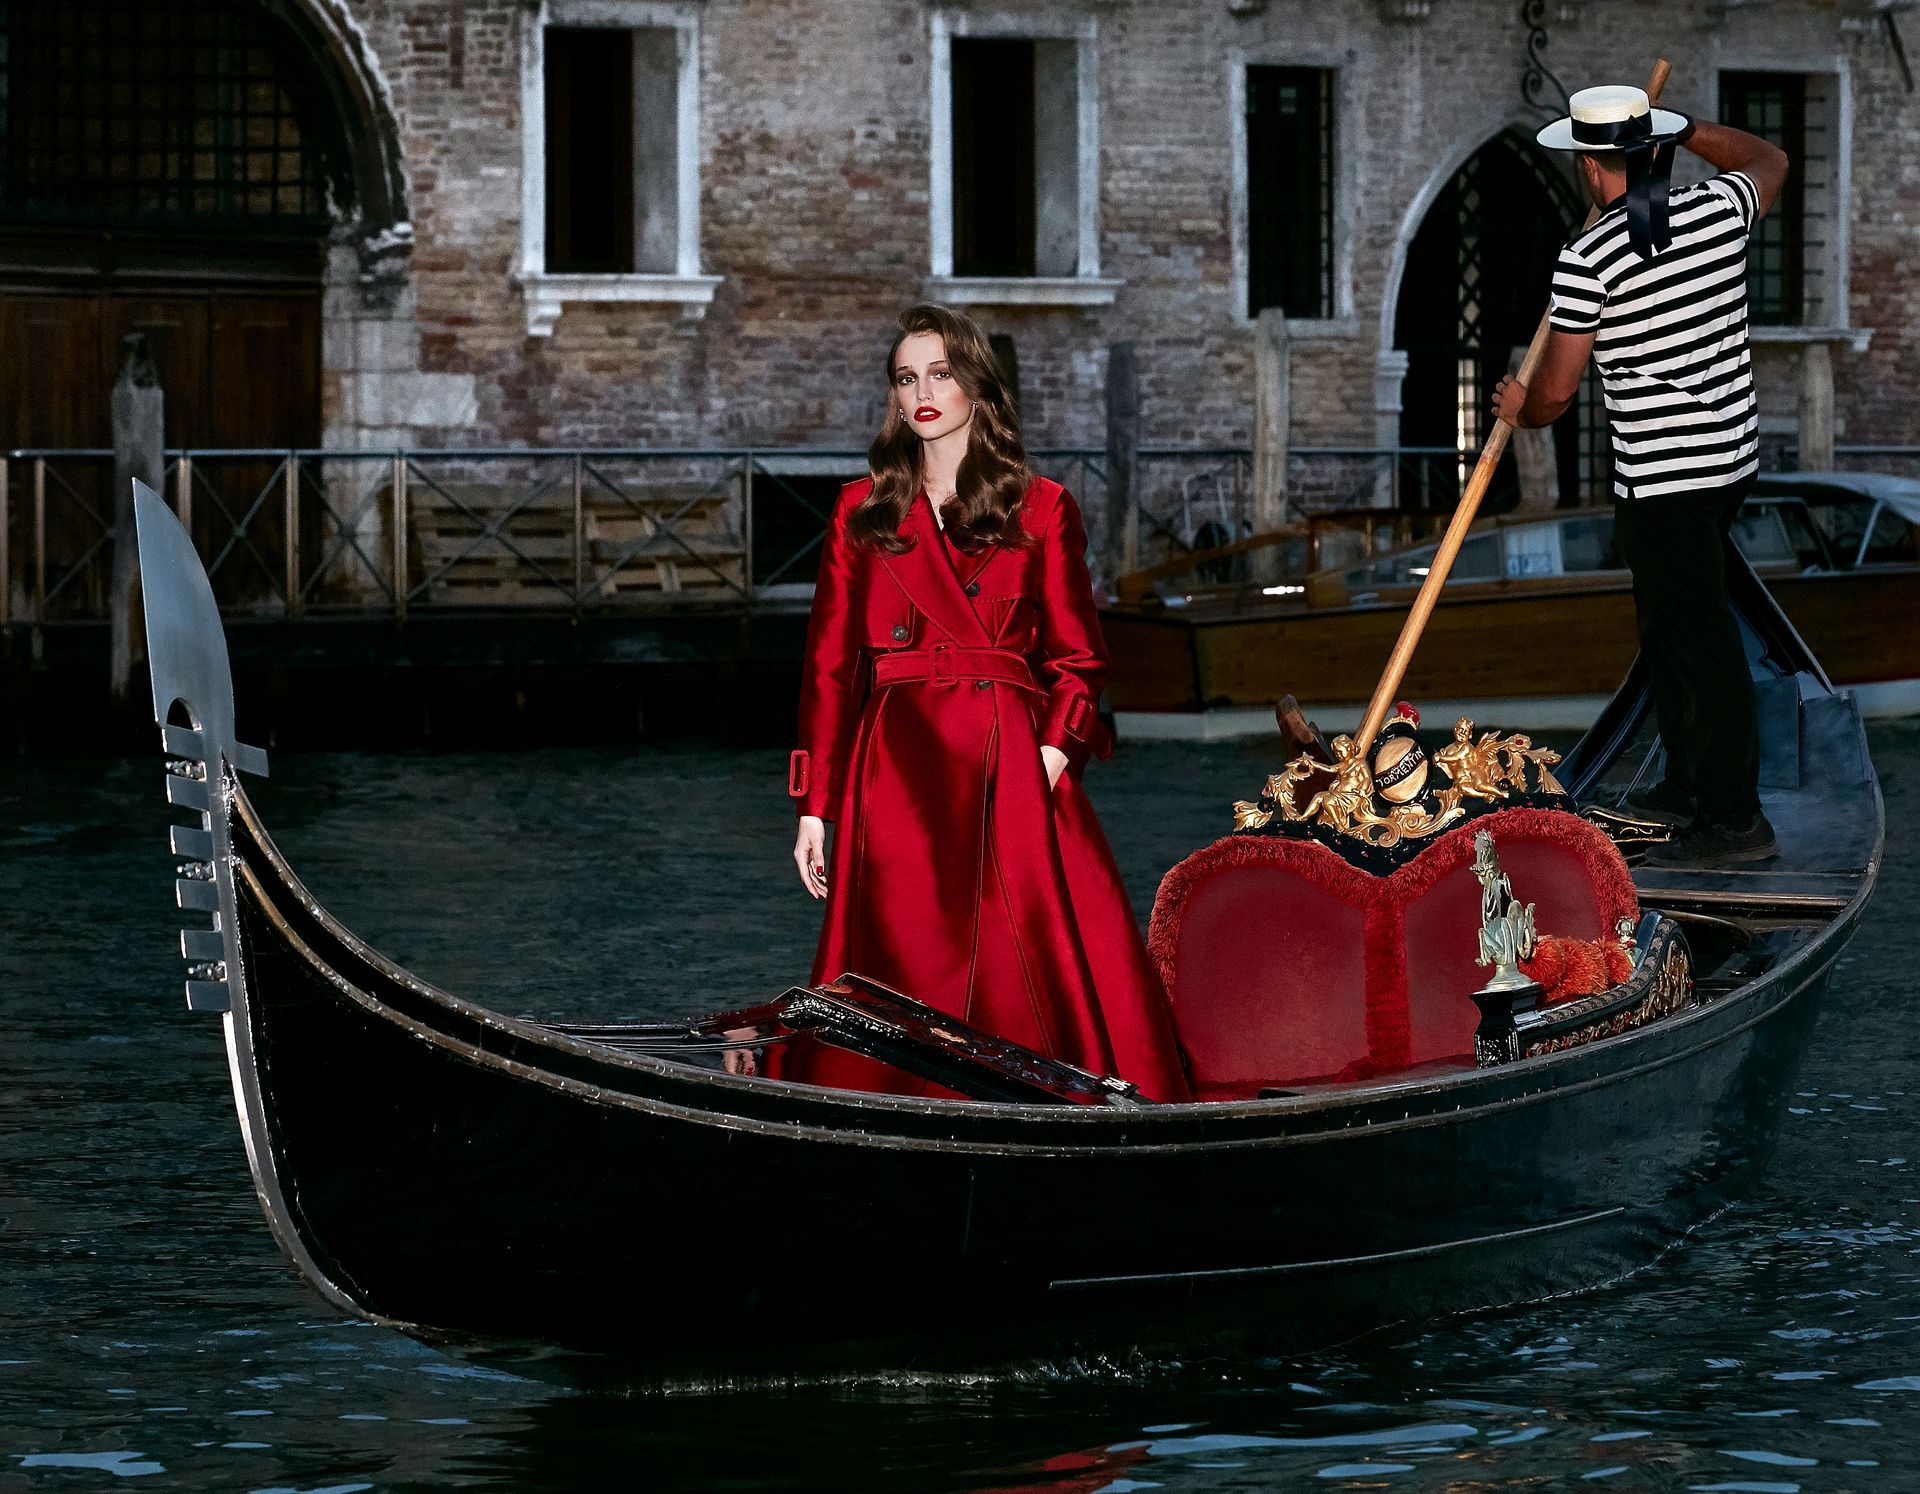 Discover “Gondola Tour” and enjoy Venice with an amazing unique experience by Palazzina Grassi.